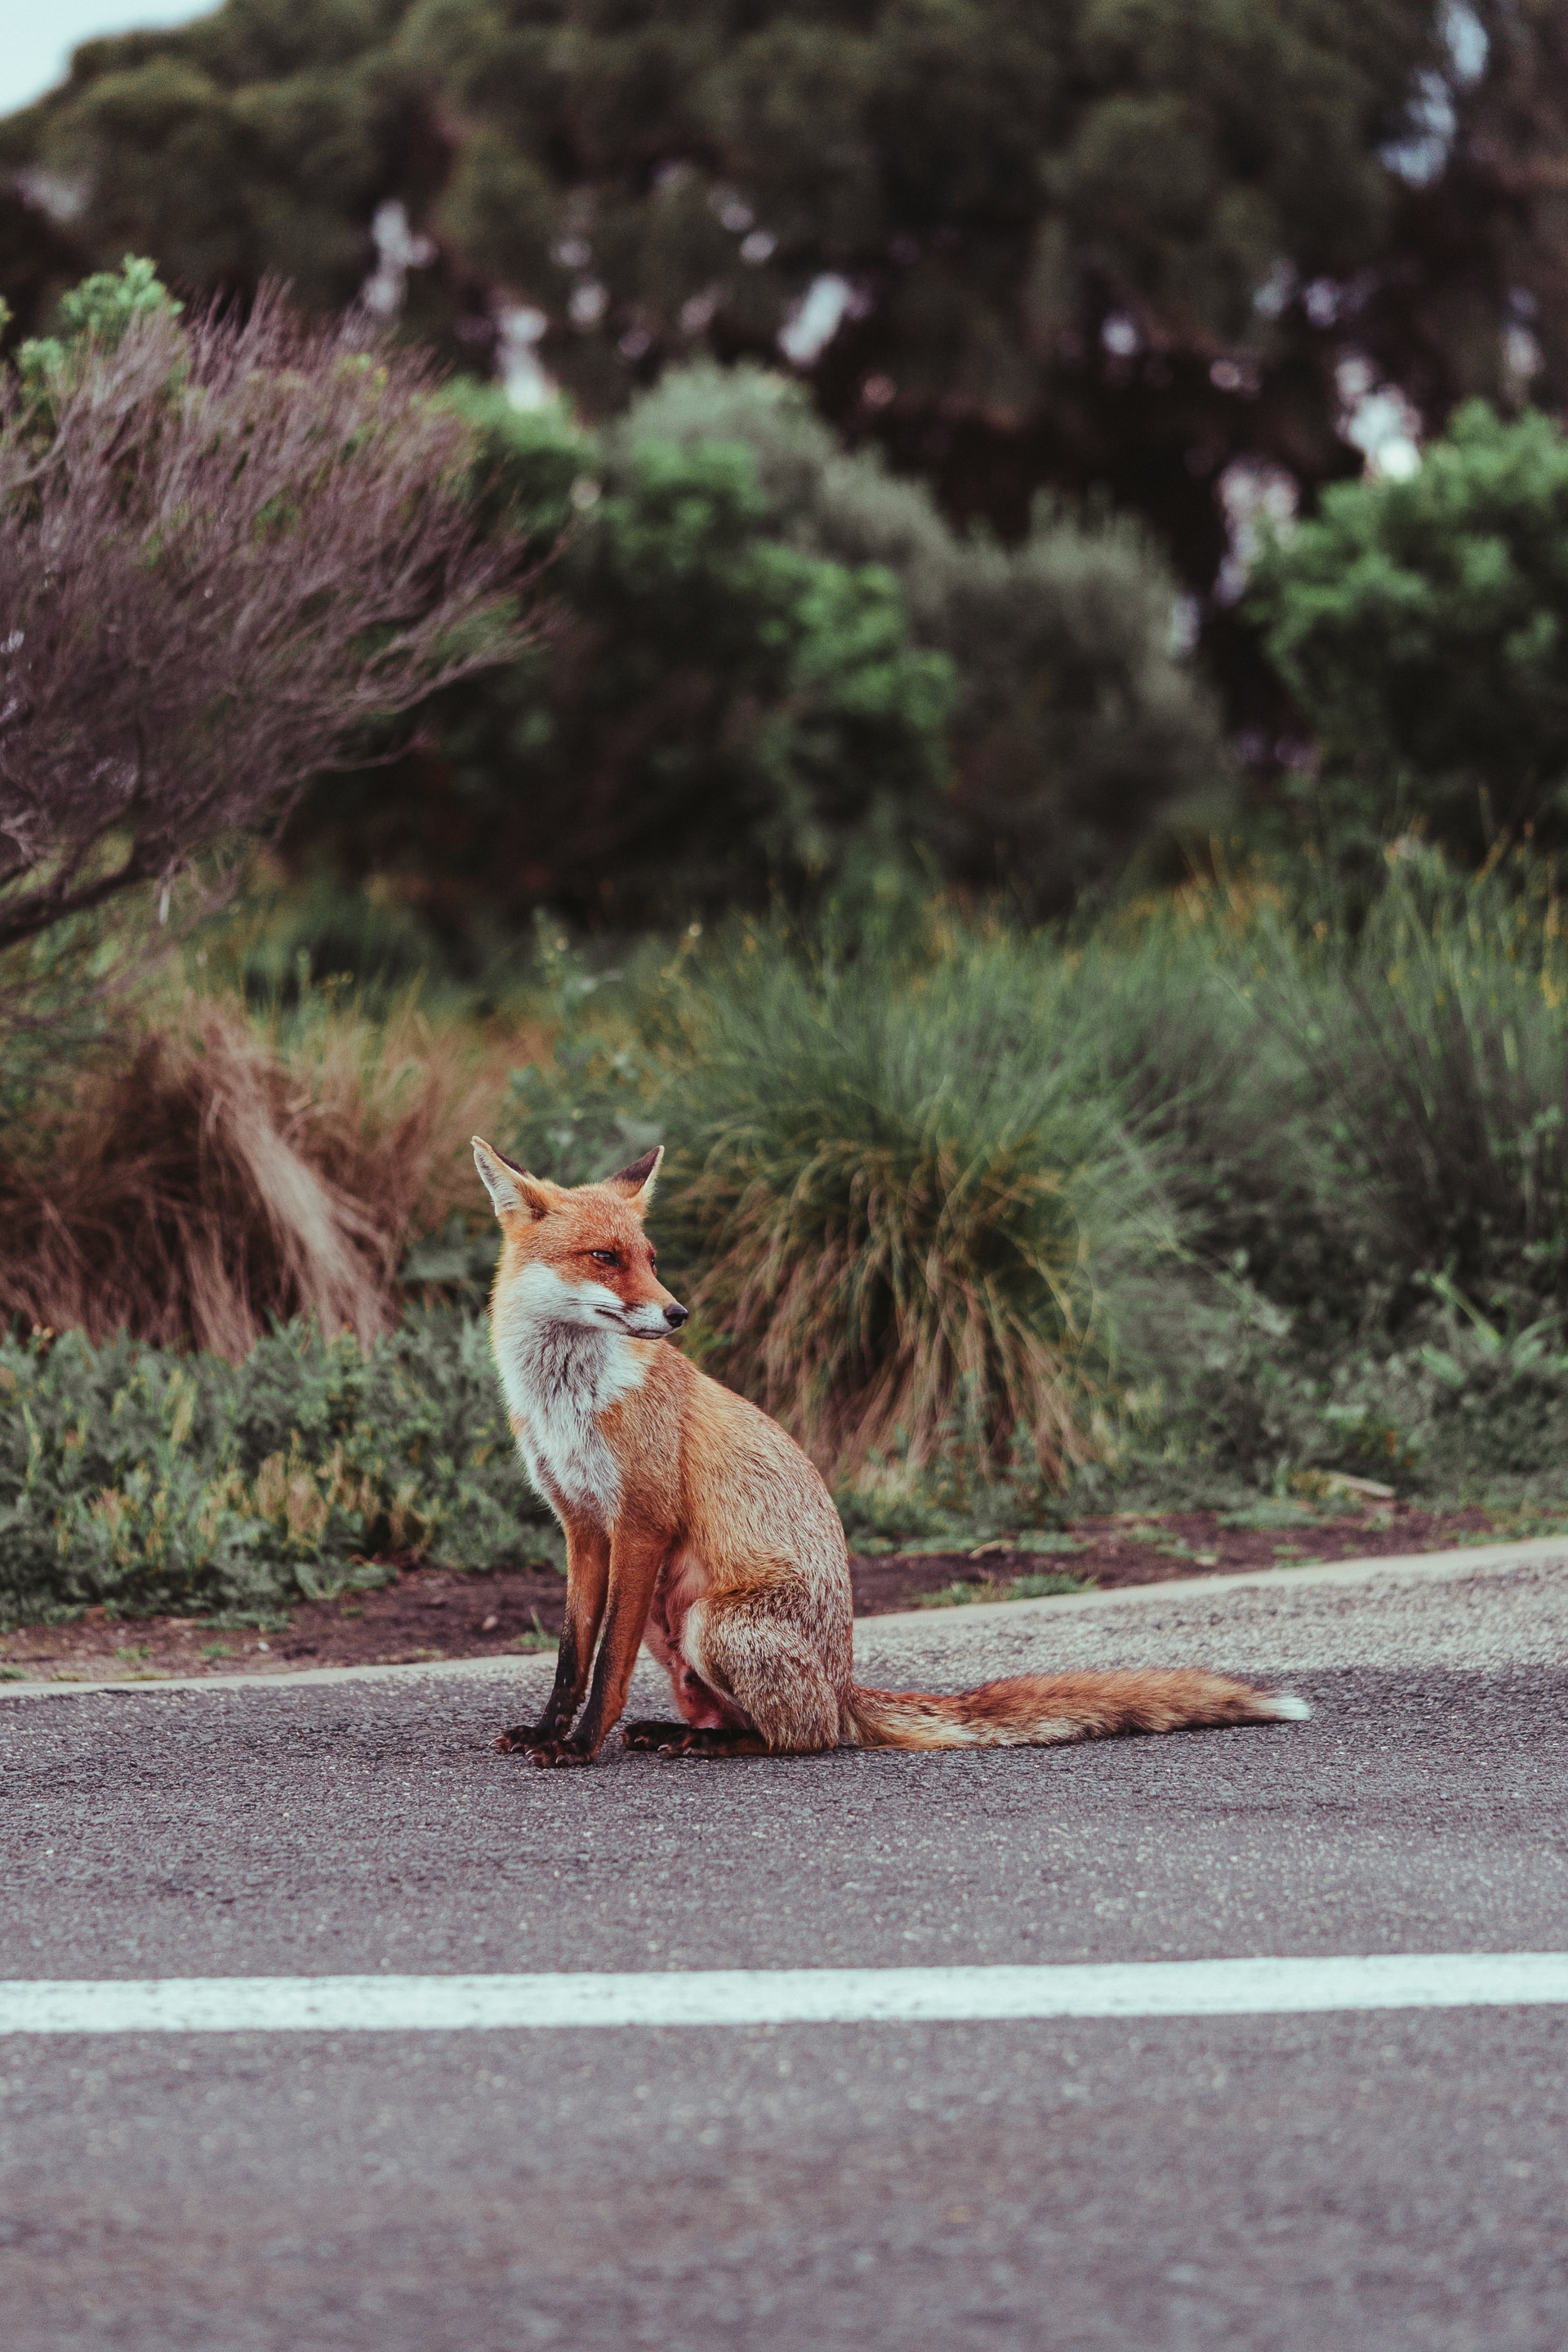 A fox sitting on the edge of a road doing a shoulder check.